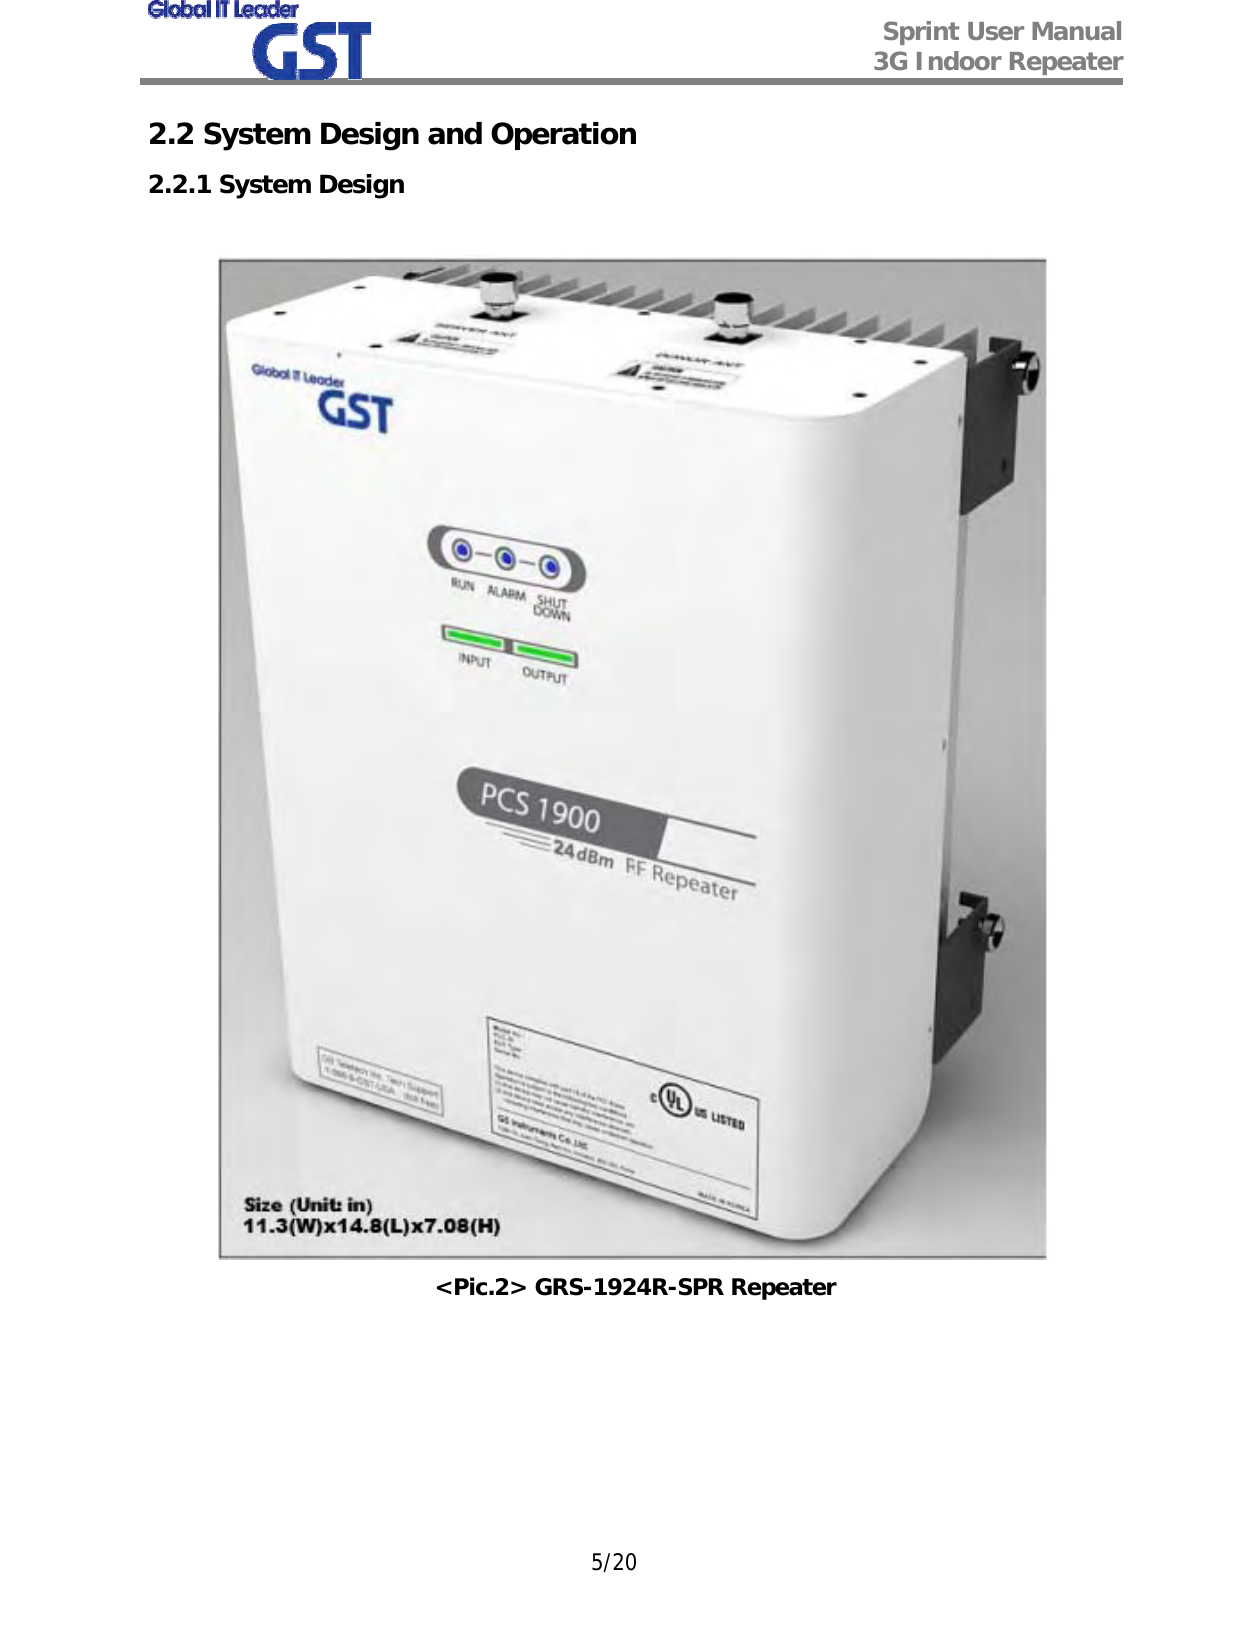  Sprint User Manual 3G Indoor Repeater   5/20 2.2 System Design and Operation 2.2.1 System Design   &lt;Pic.2&gt; GRS-1924R-SPR Repeater  